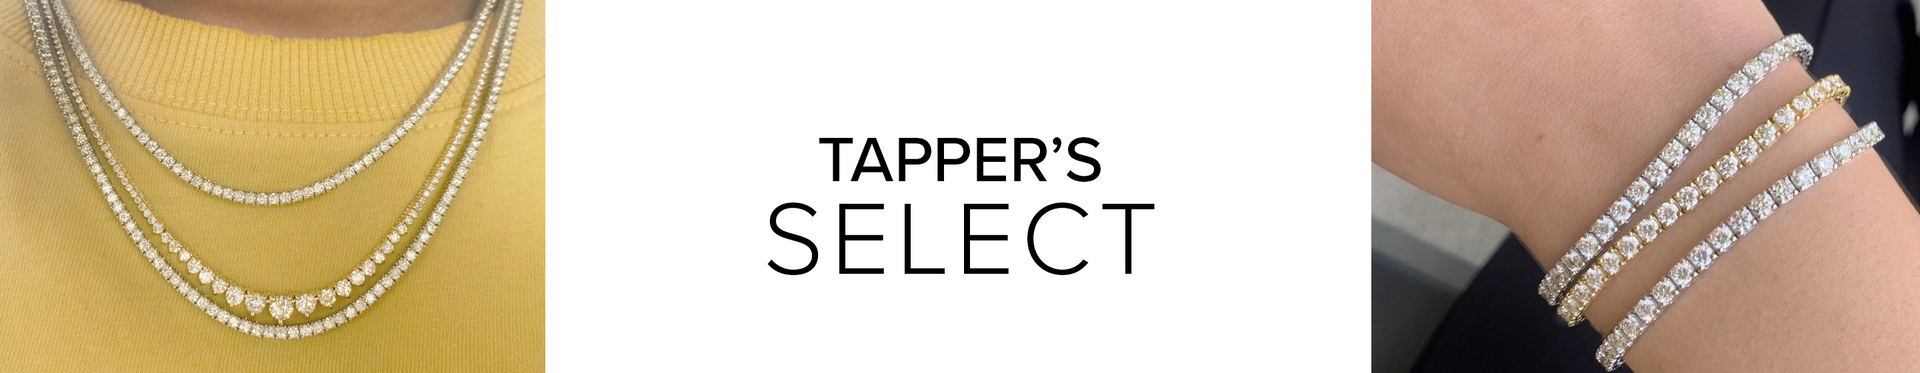 Tapper's Select